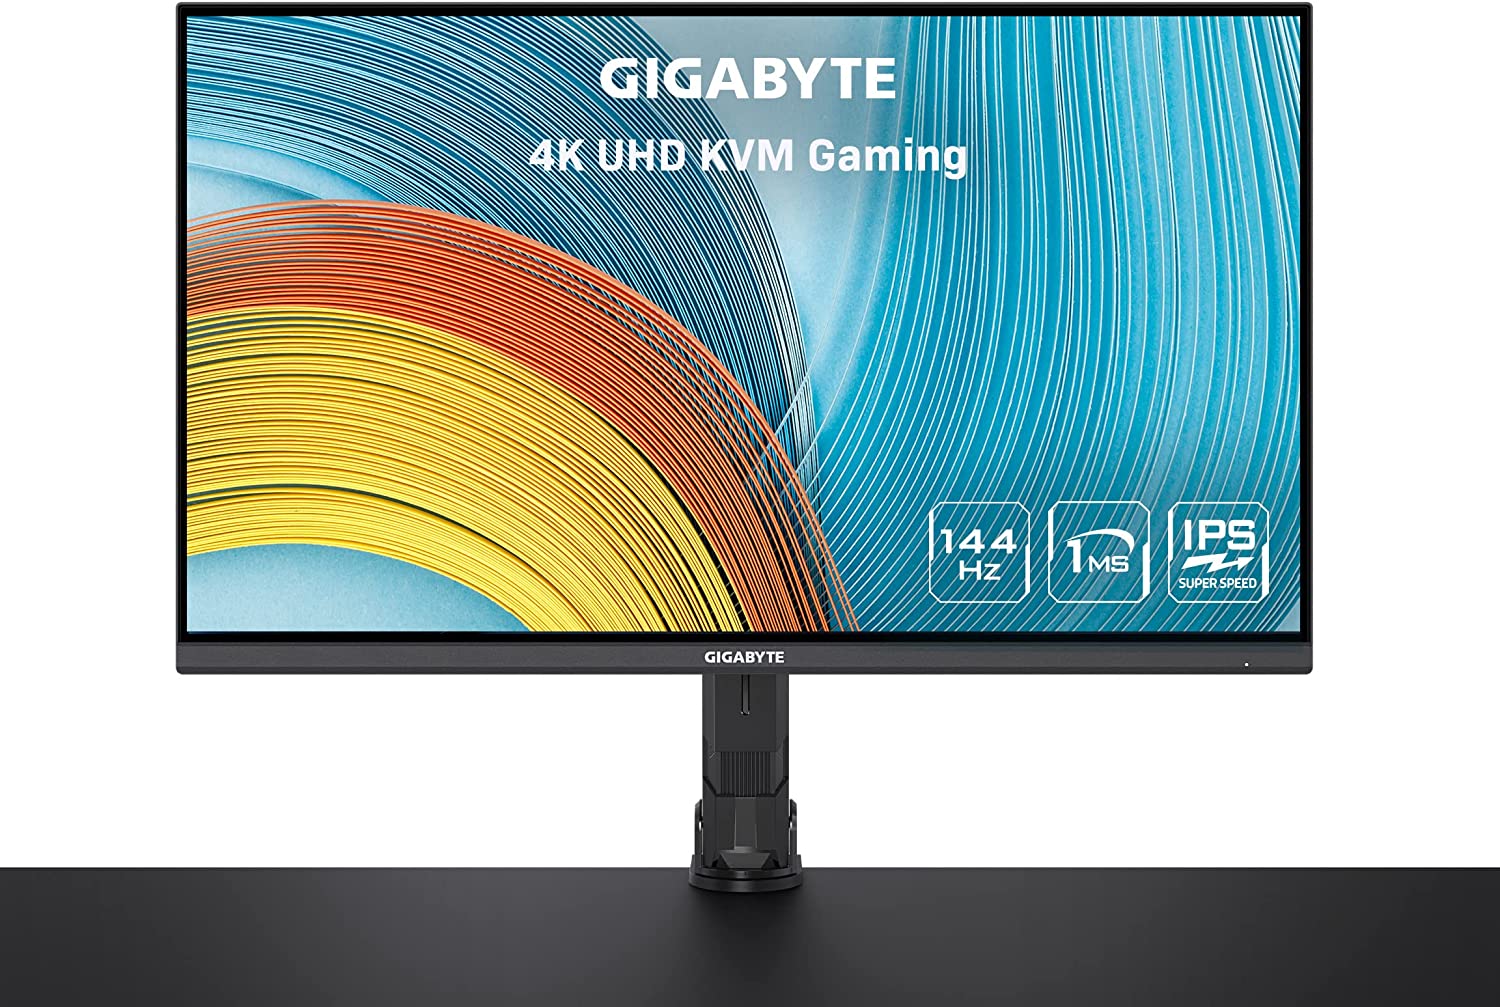 [Live Again] GIGABYTE M32U-AE Arm Edition 32" 144Hz 2160P UHD KVM Gaming Monitor (Other sellers --> Amazon) $549.99